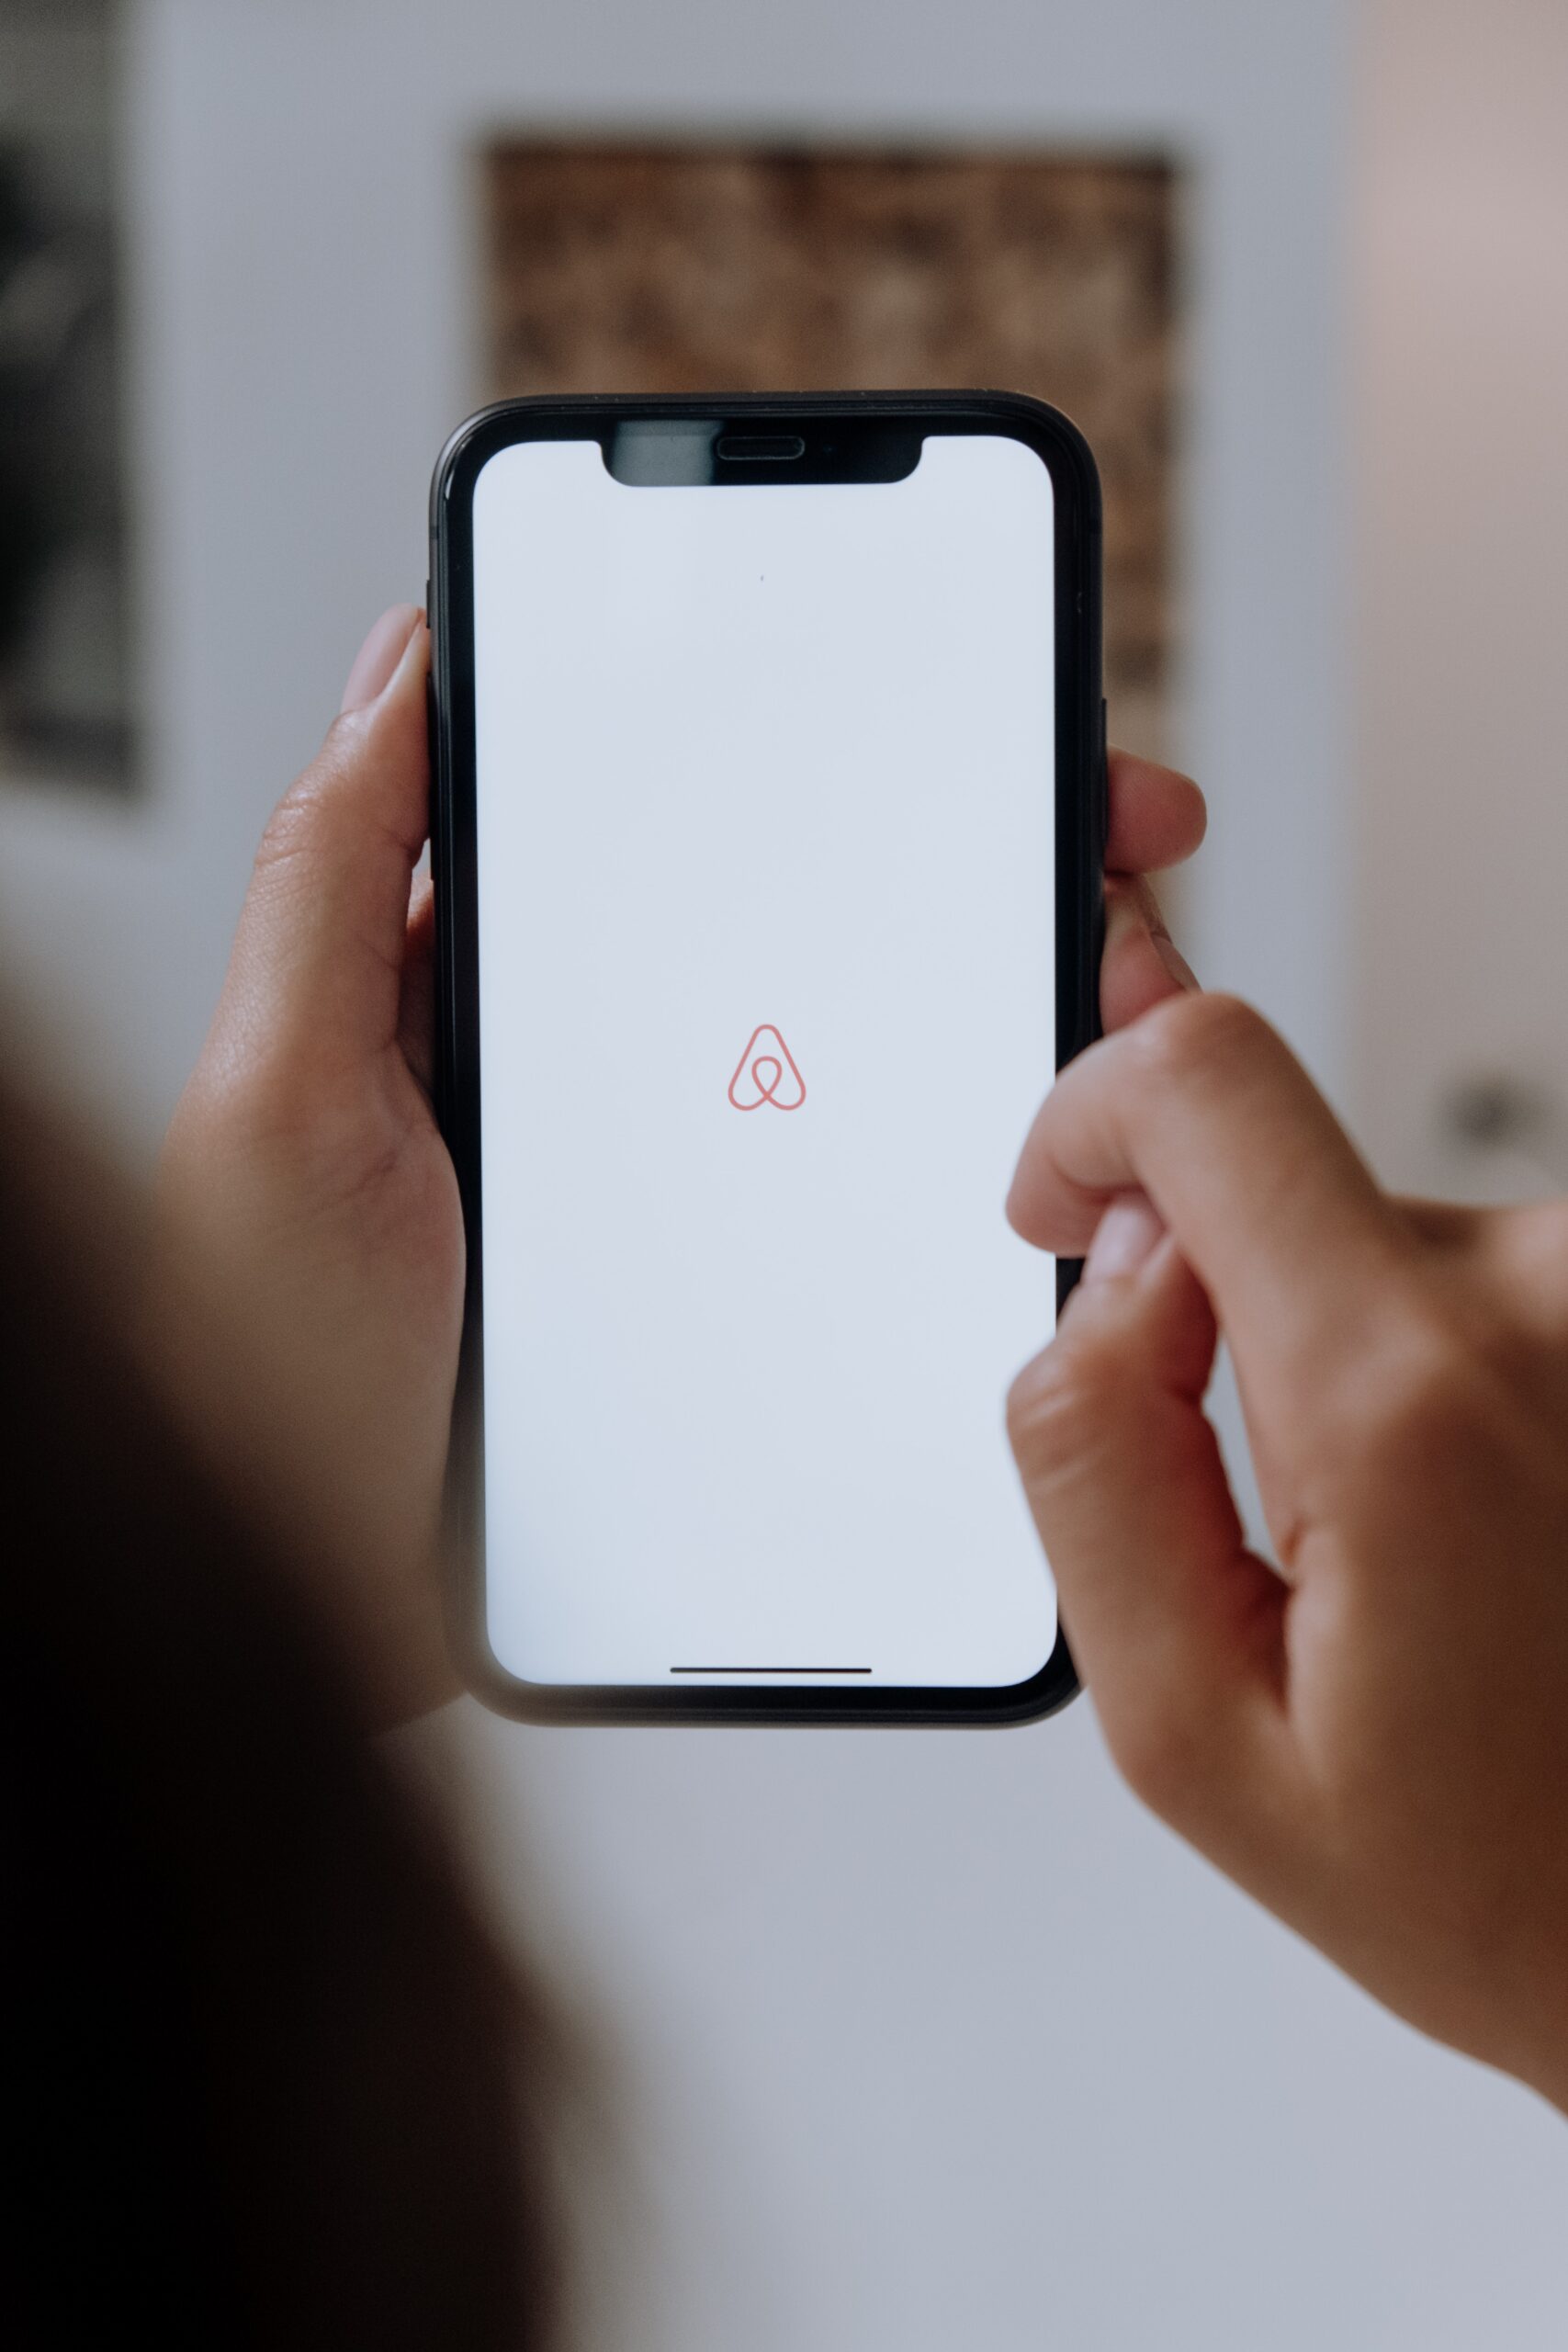 A closeup of a person opening the Airbnb app on their mobile phone